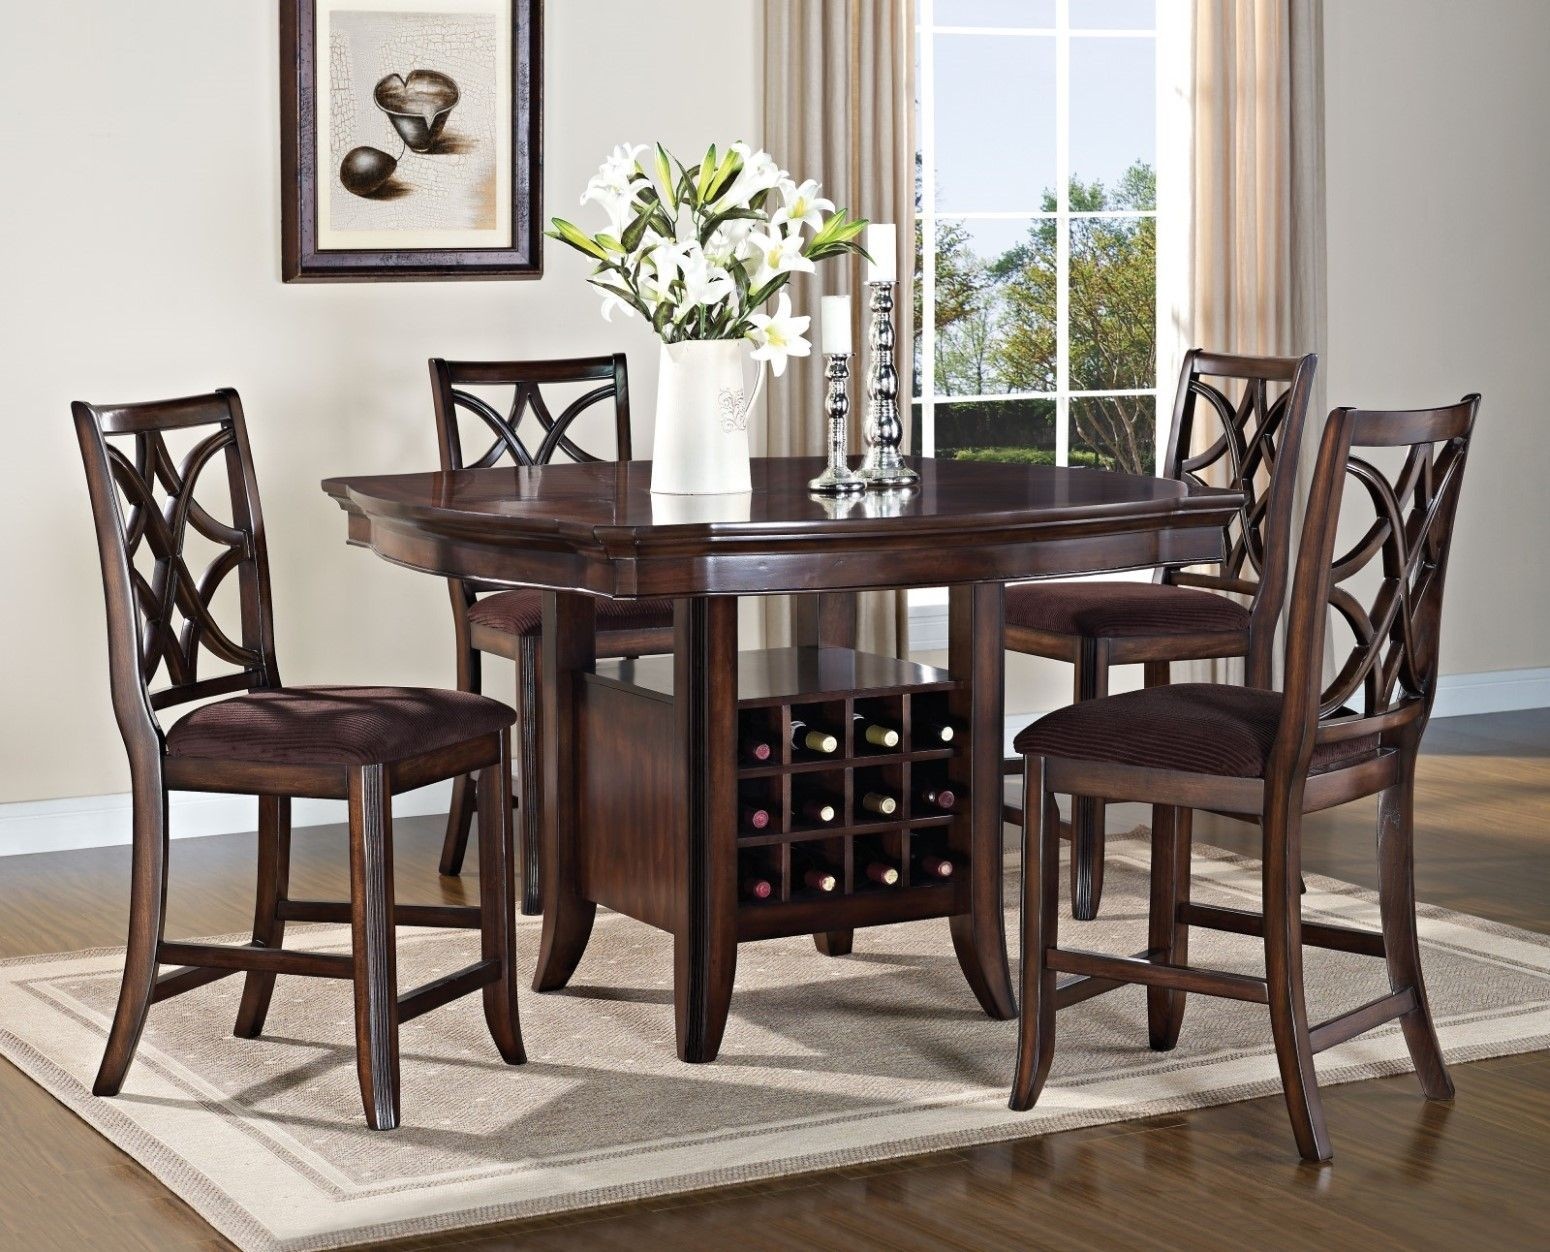 Lansdowne 54 counter height dining table w wine storage